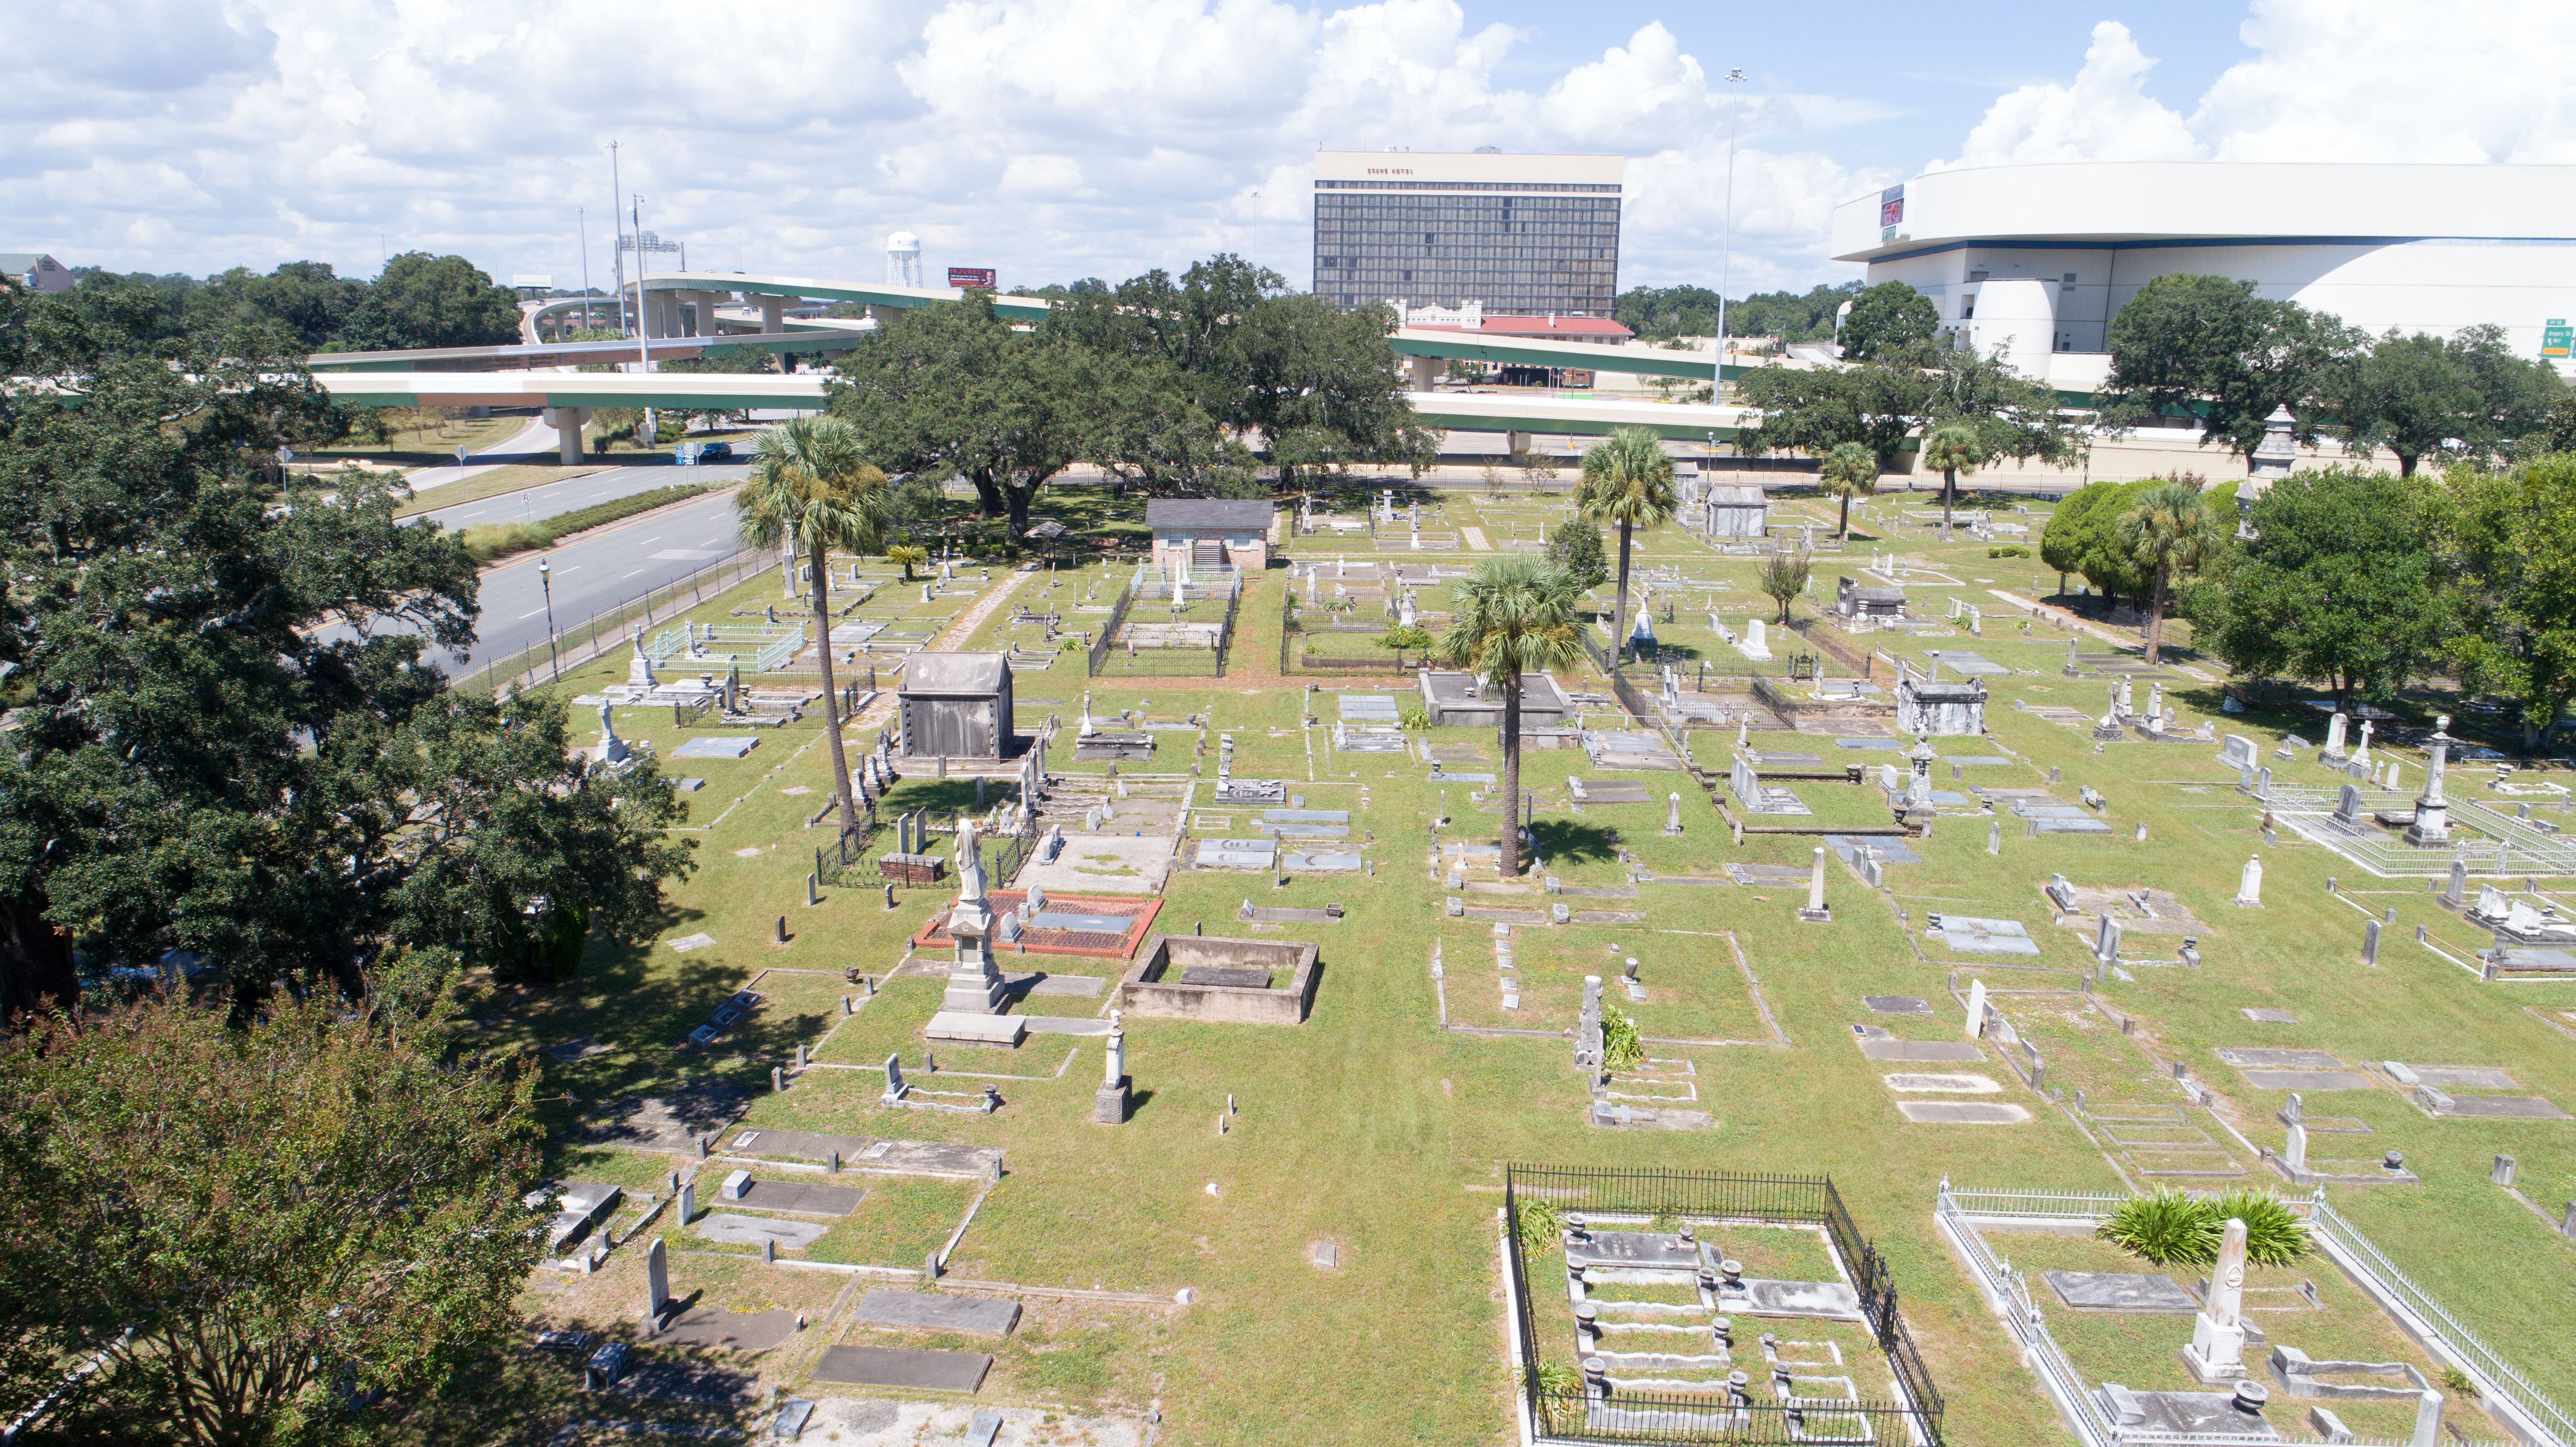 An image taken from a drone showing St. Michaels Cemetery